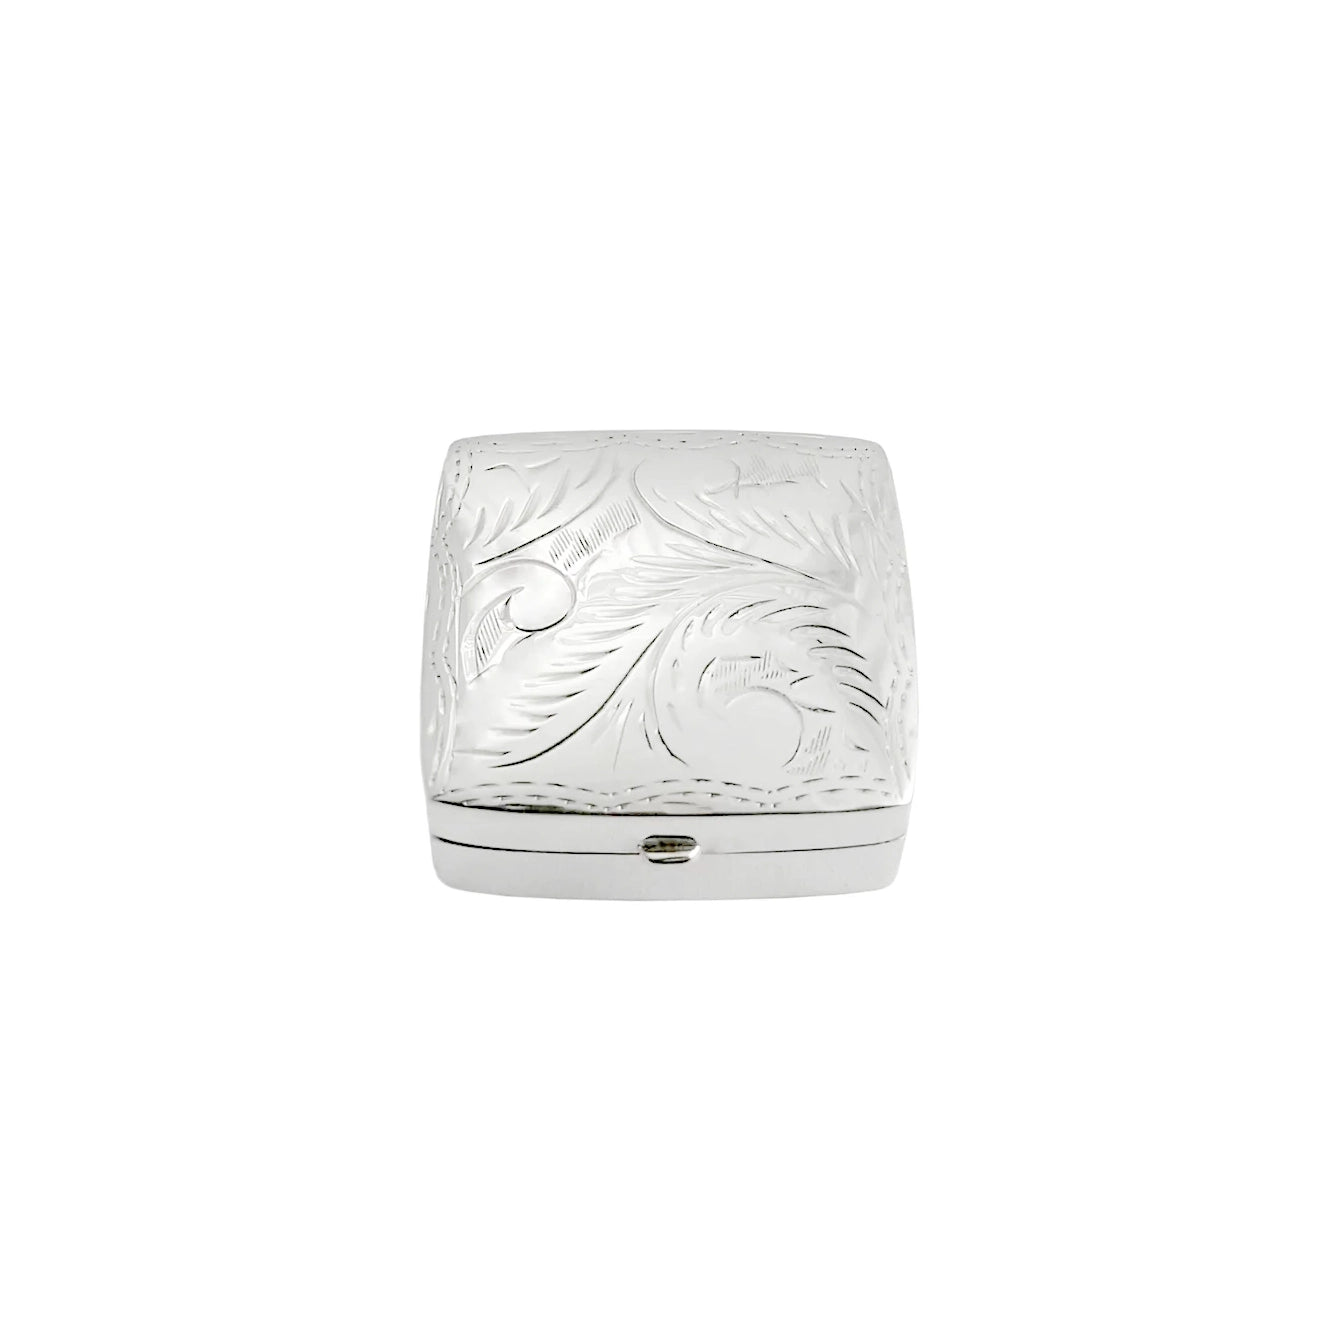 Engraved Pillbox English Sterling Silver